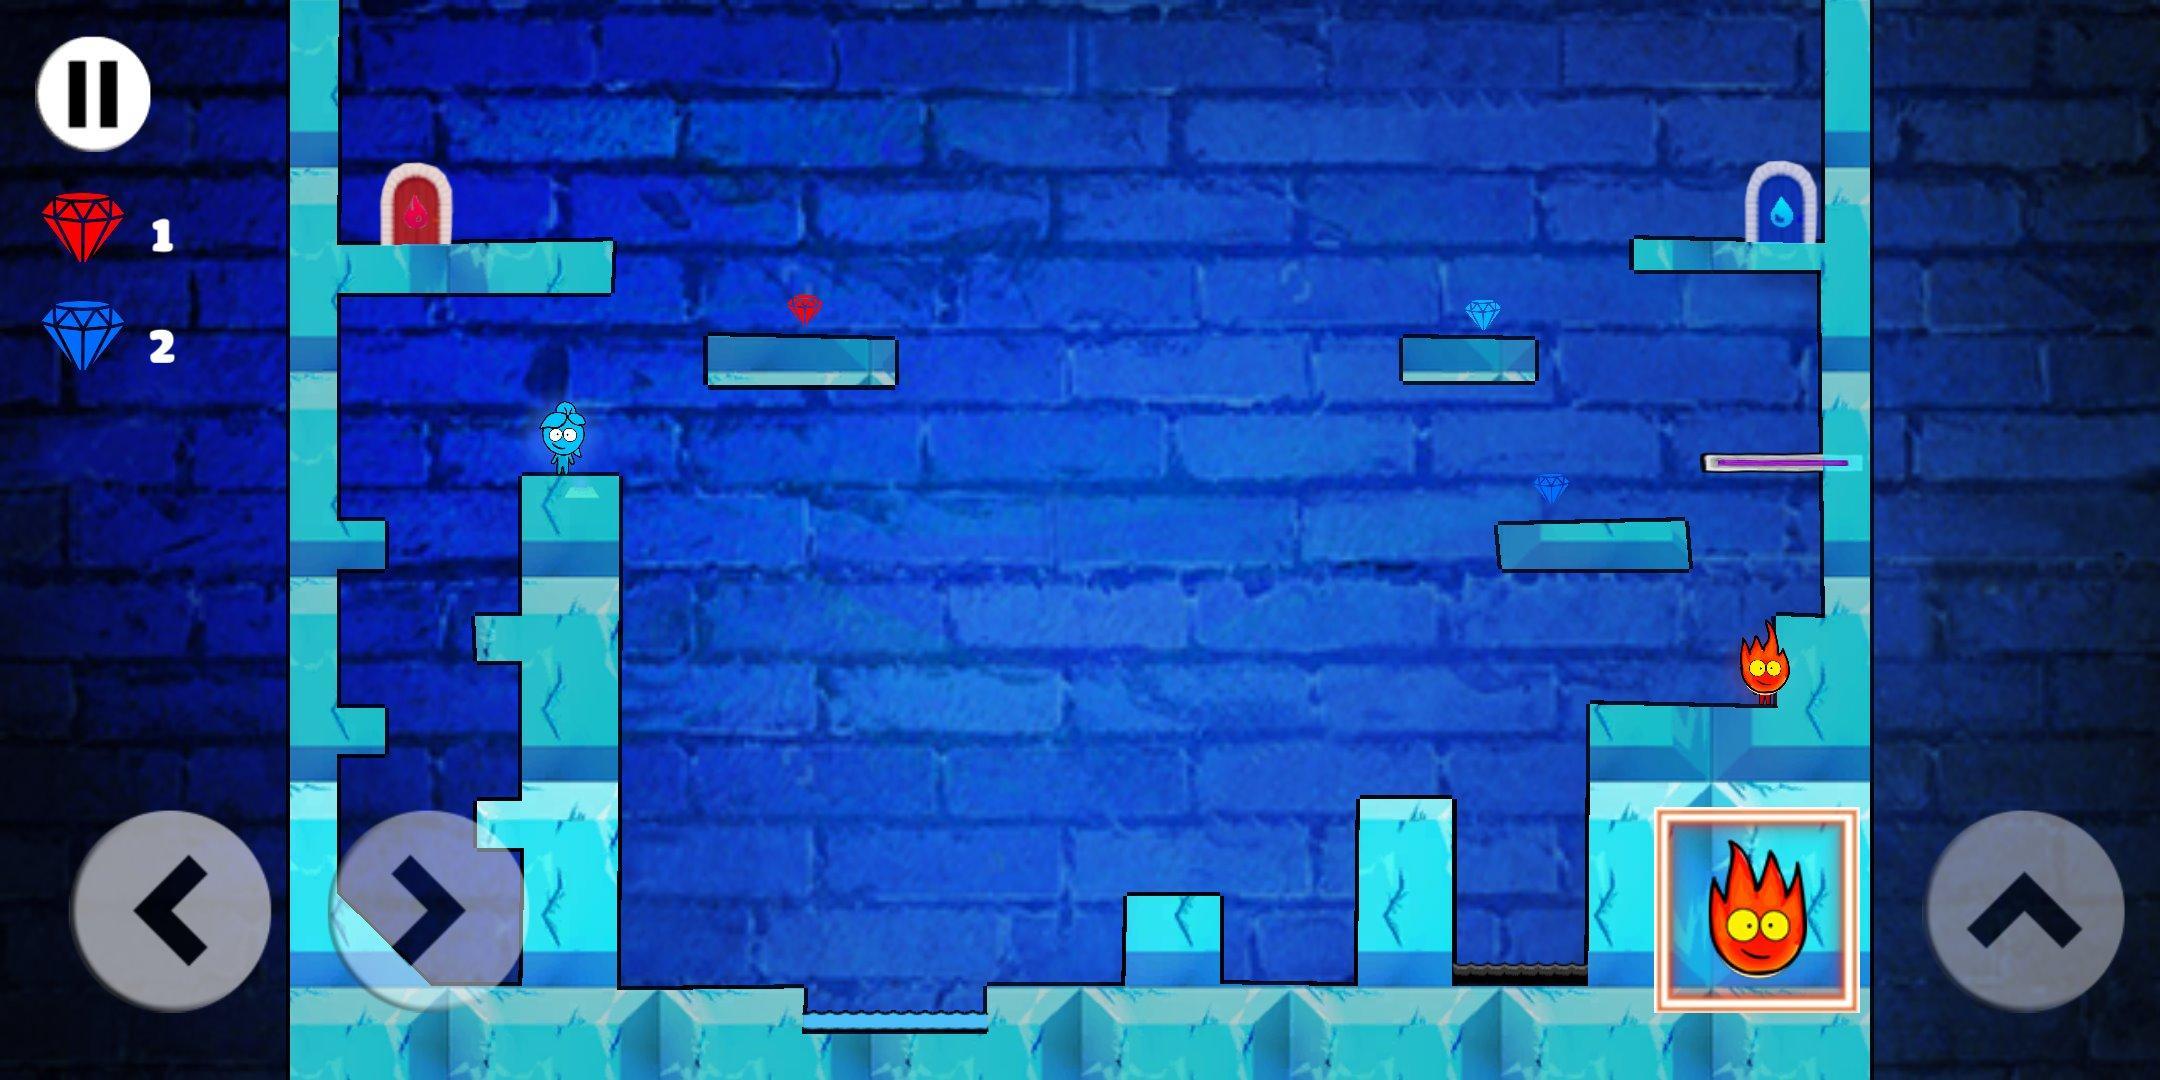 Fireboy Watergirl - Ice Temple 截 图 7.